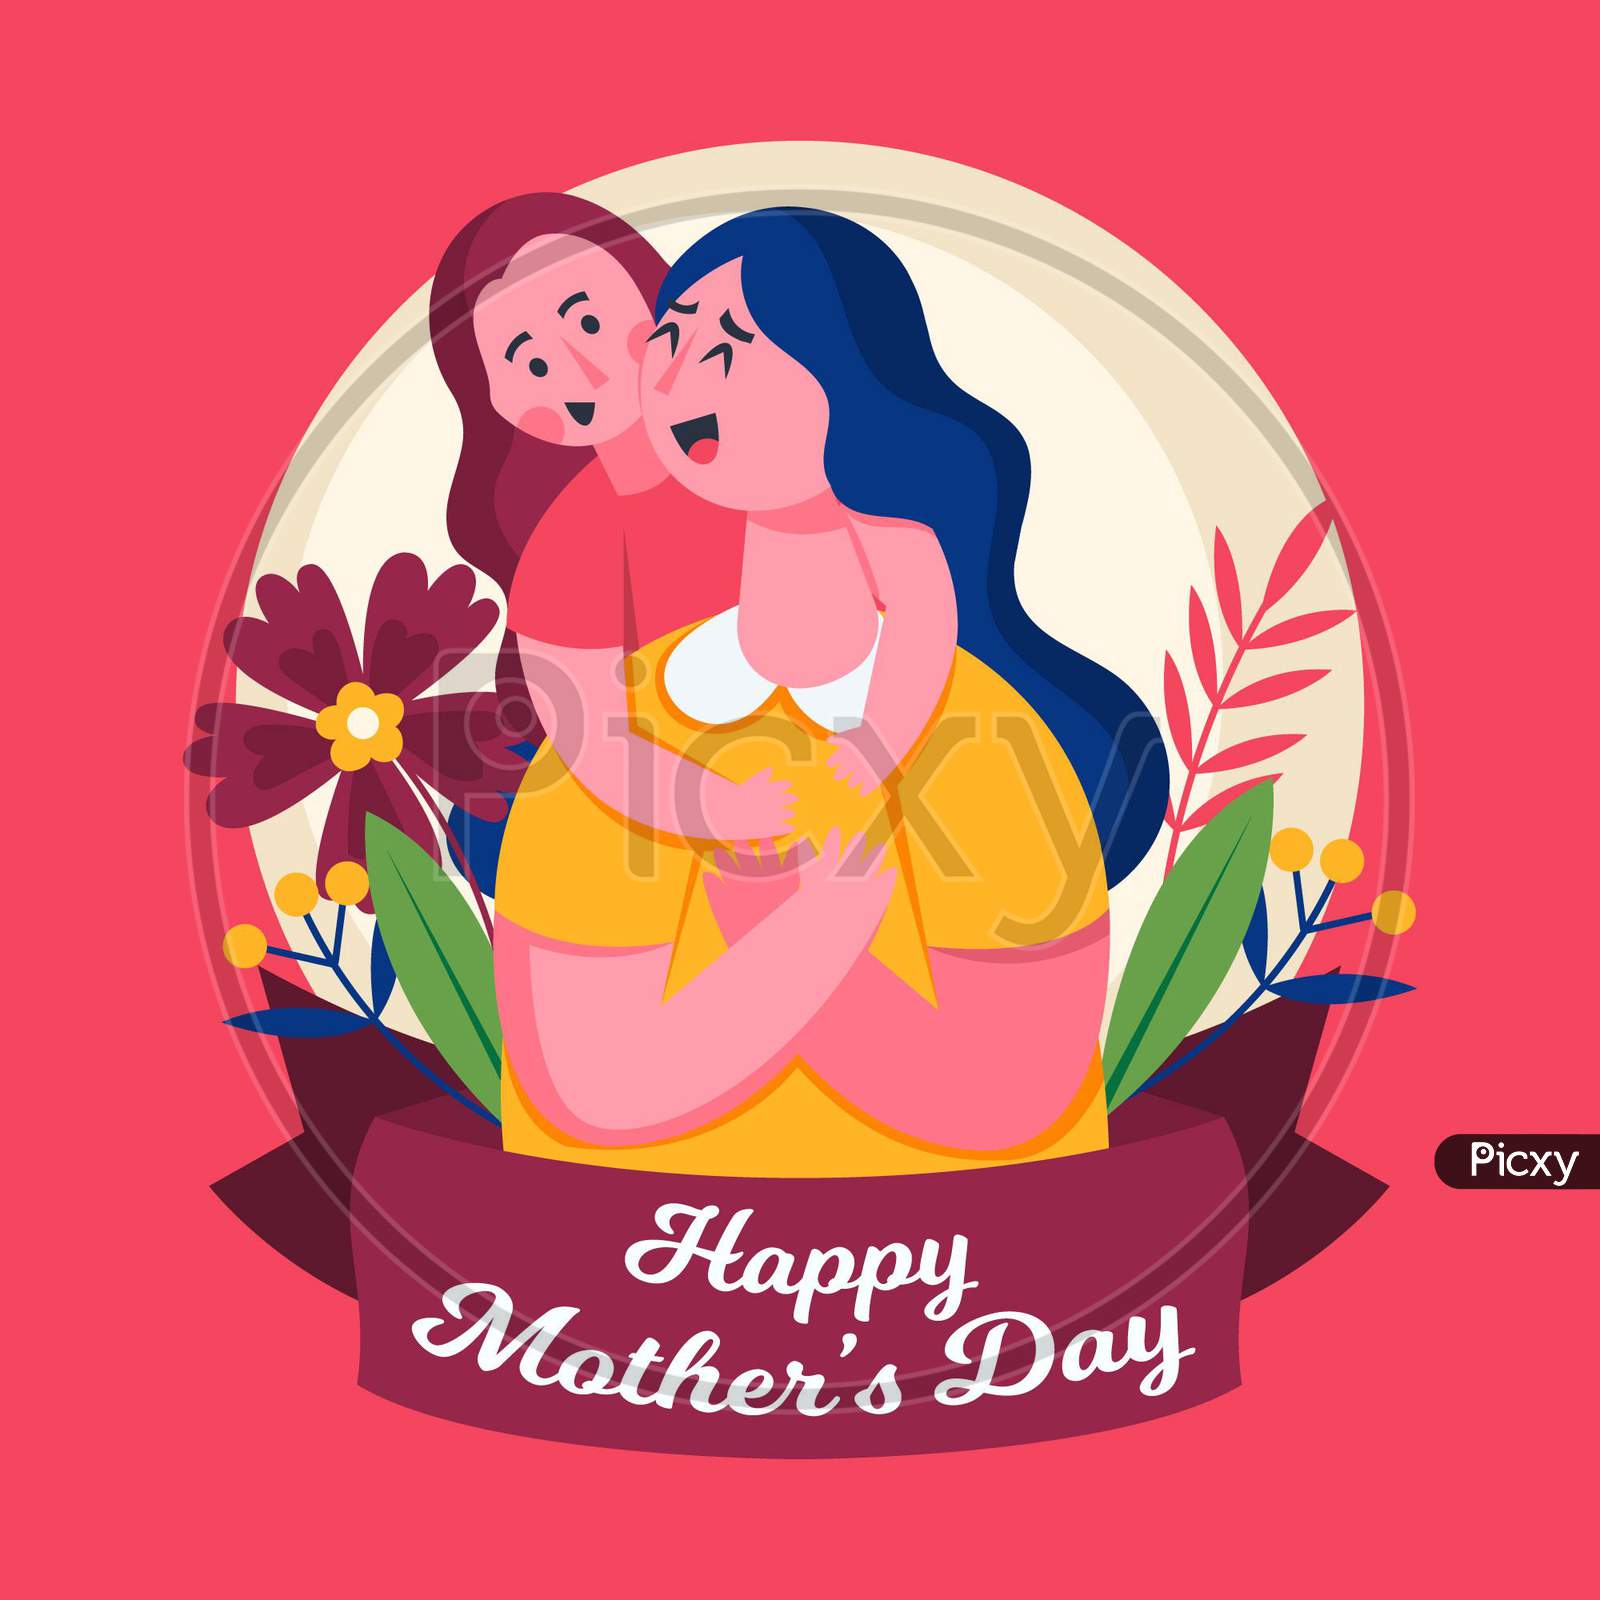 Mother's Day  I Love You Mom Wishes, Greeting, Banner